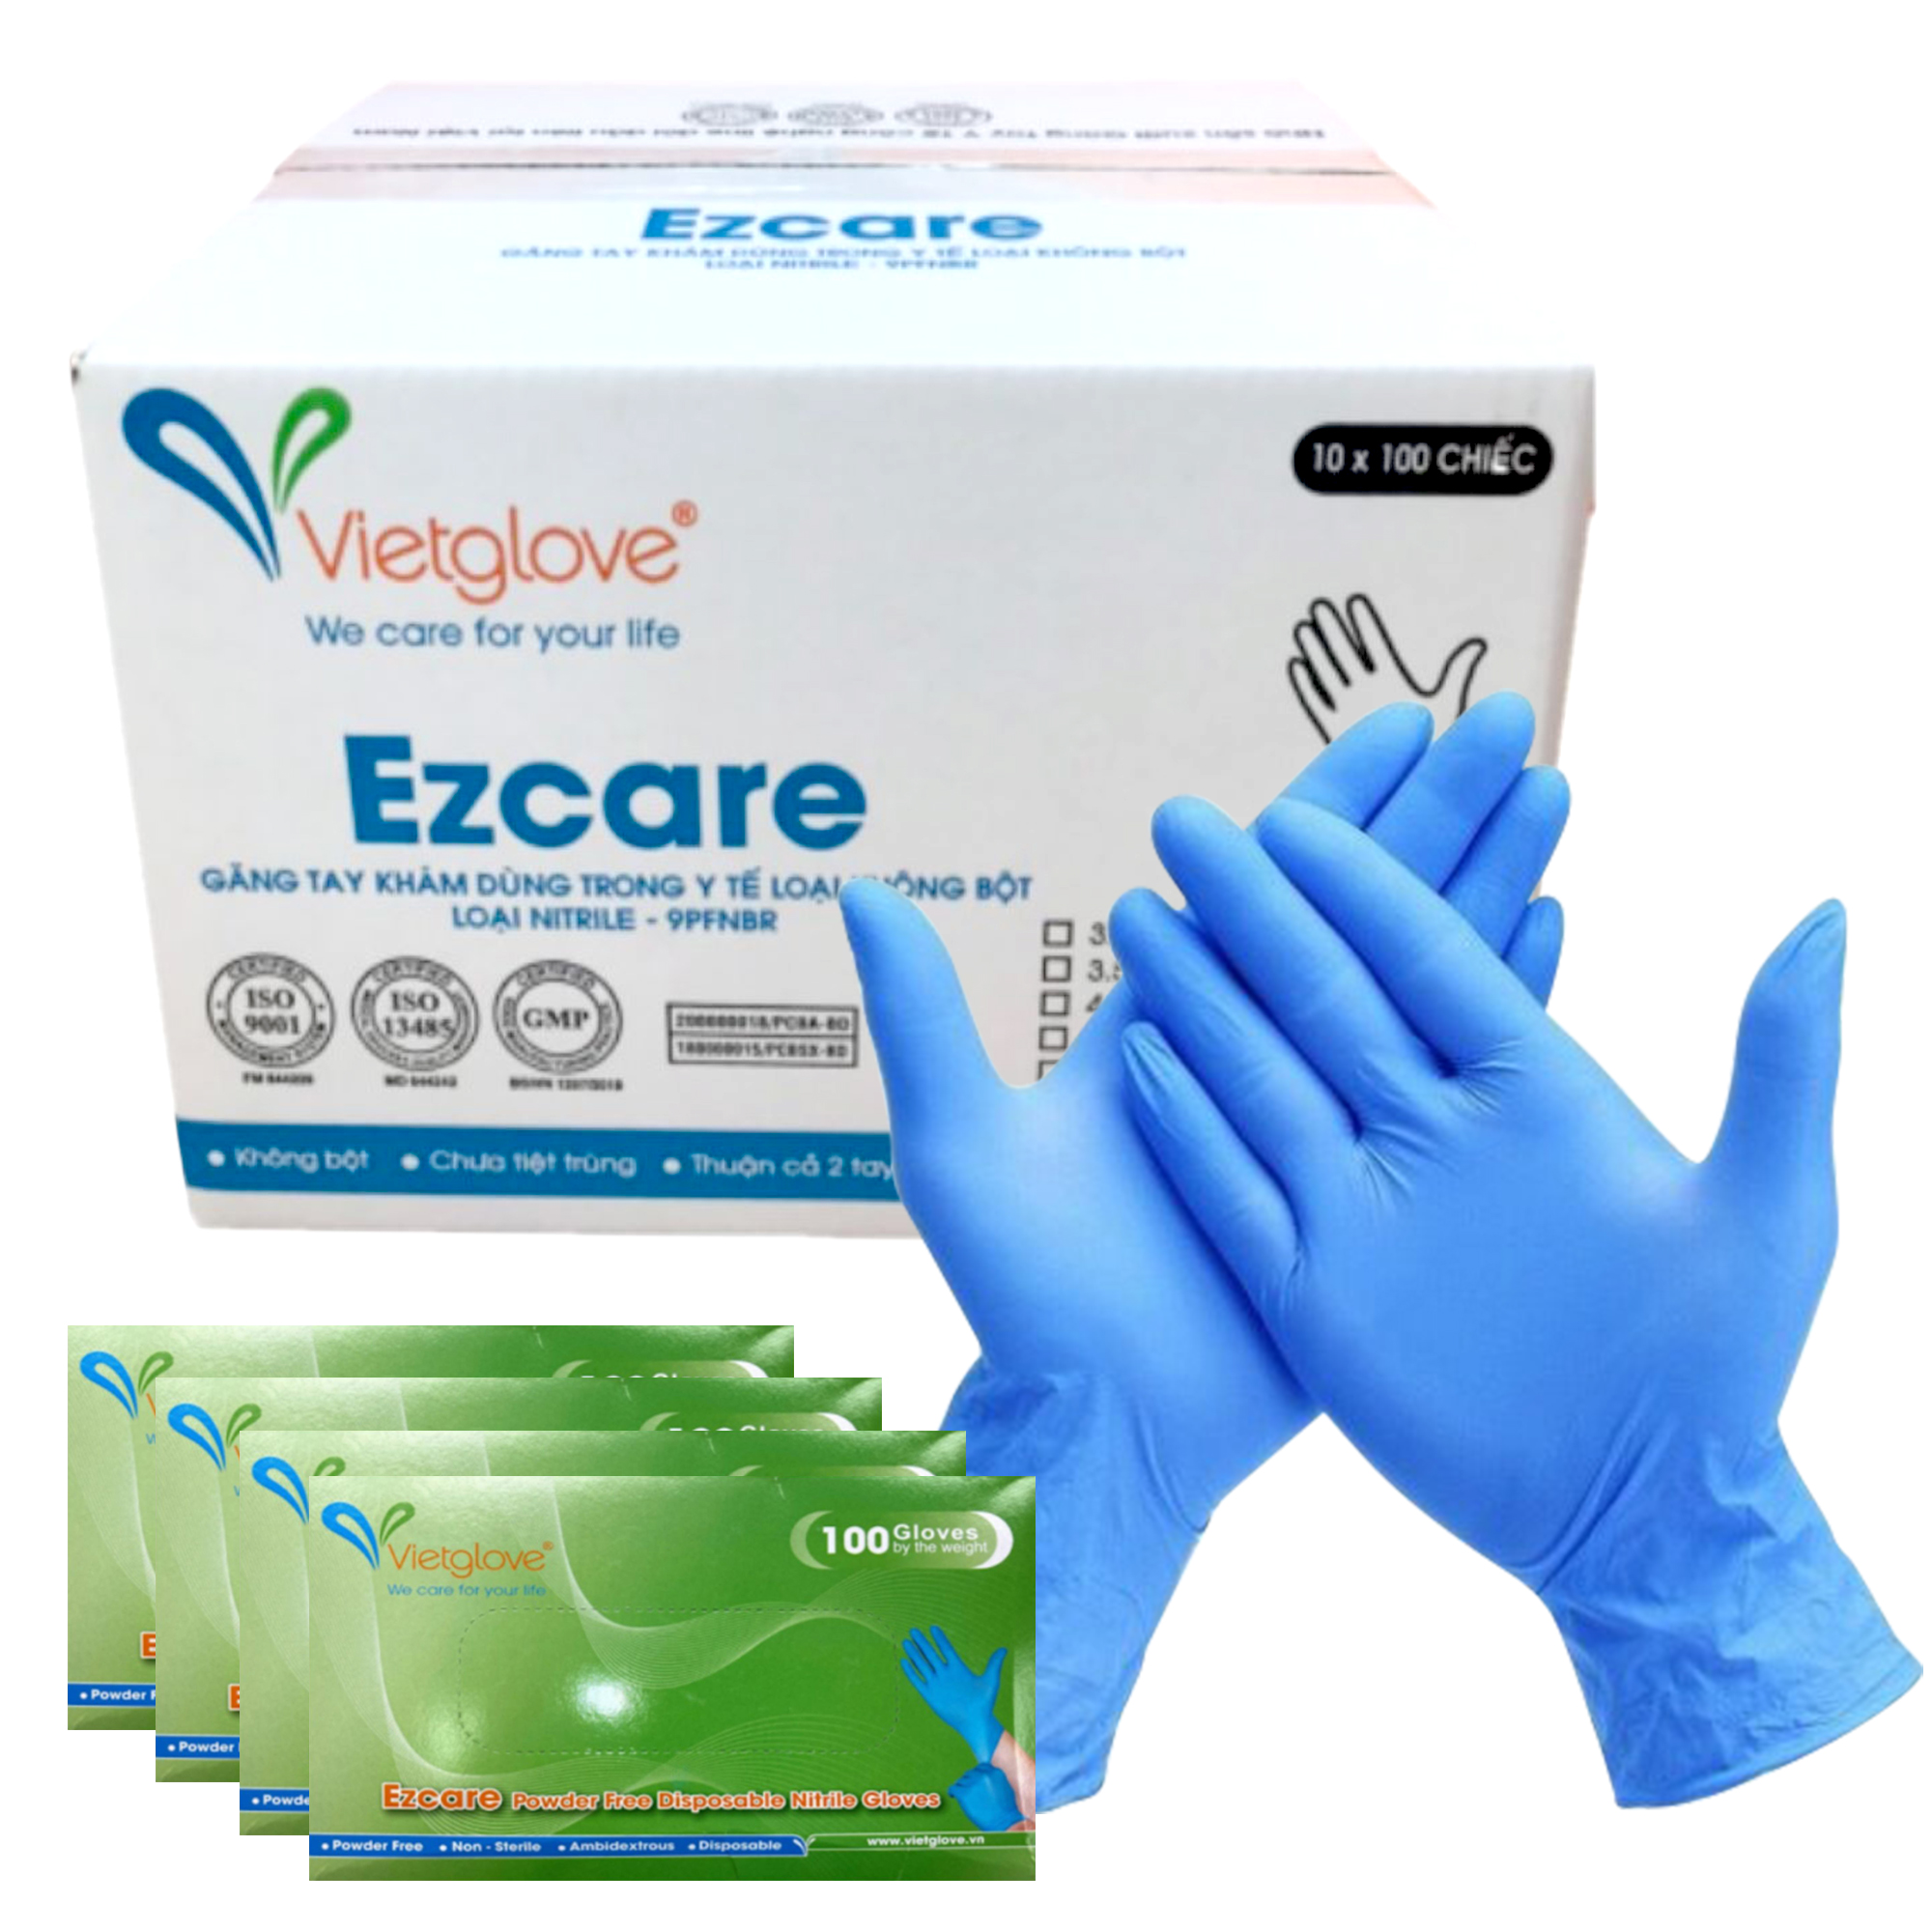 HALYARD SKYBREEZE Nitrile Exam Gloves 3.5 mil Powder-Free Size Small Box of 200 47374